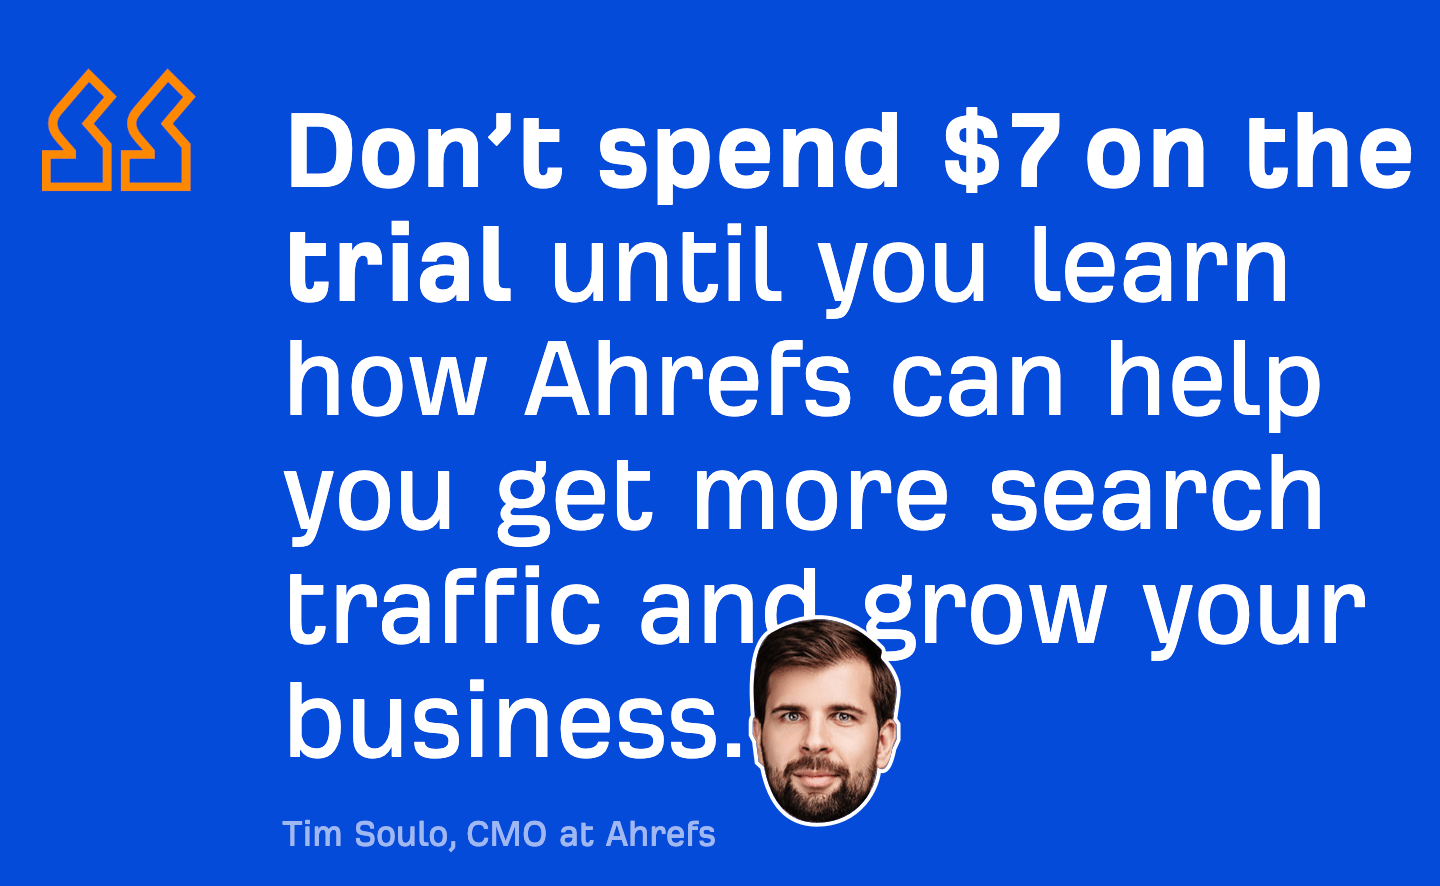 Ahrefs CMO Tim Soulo cautioning people not to buy the $7, seven-day trial until they learn more about Ahrefs